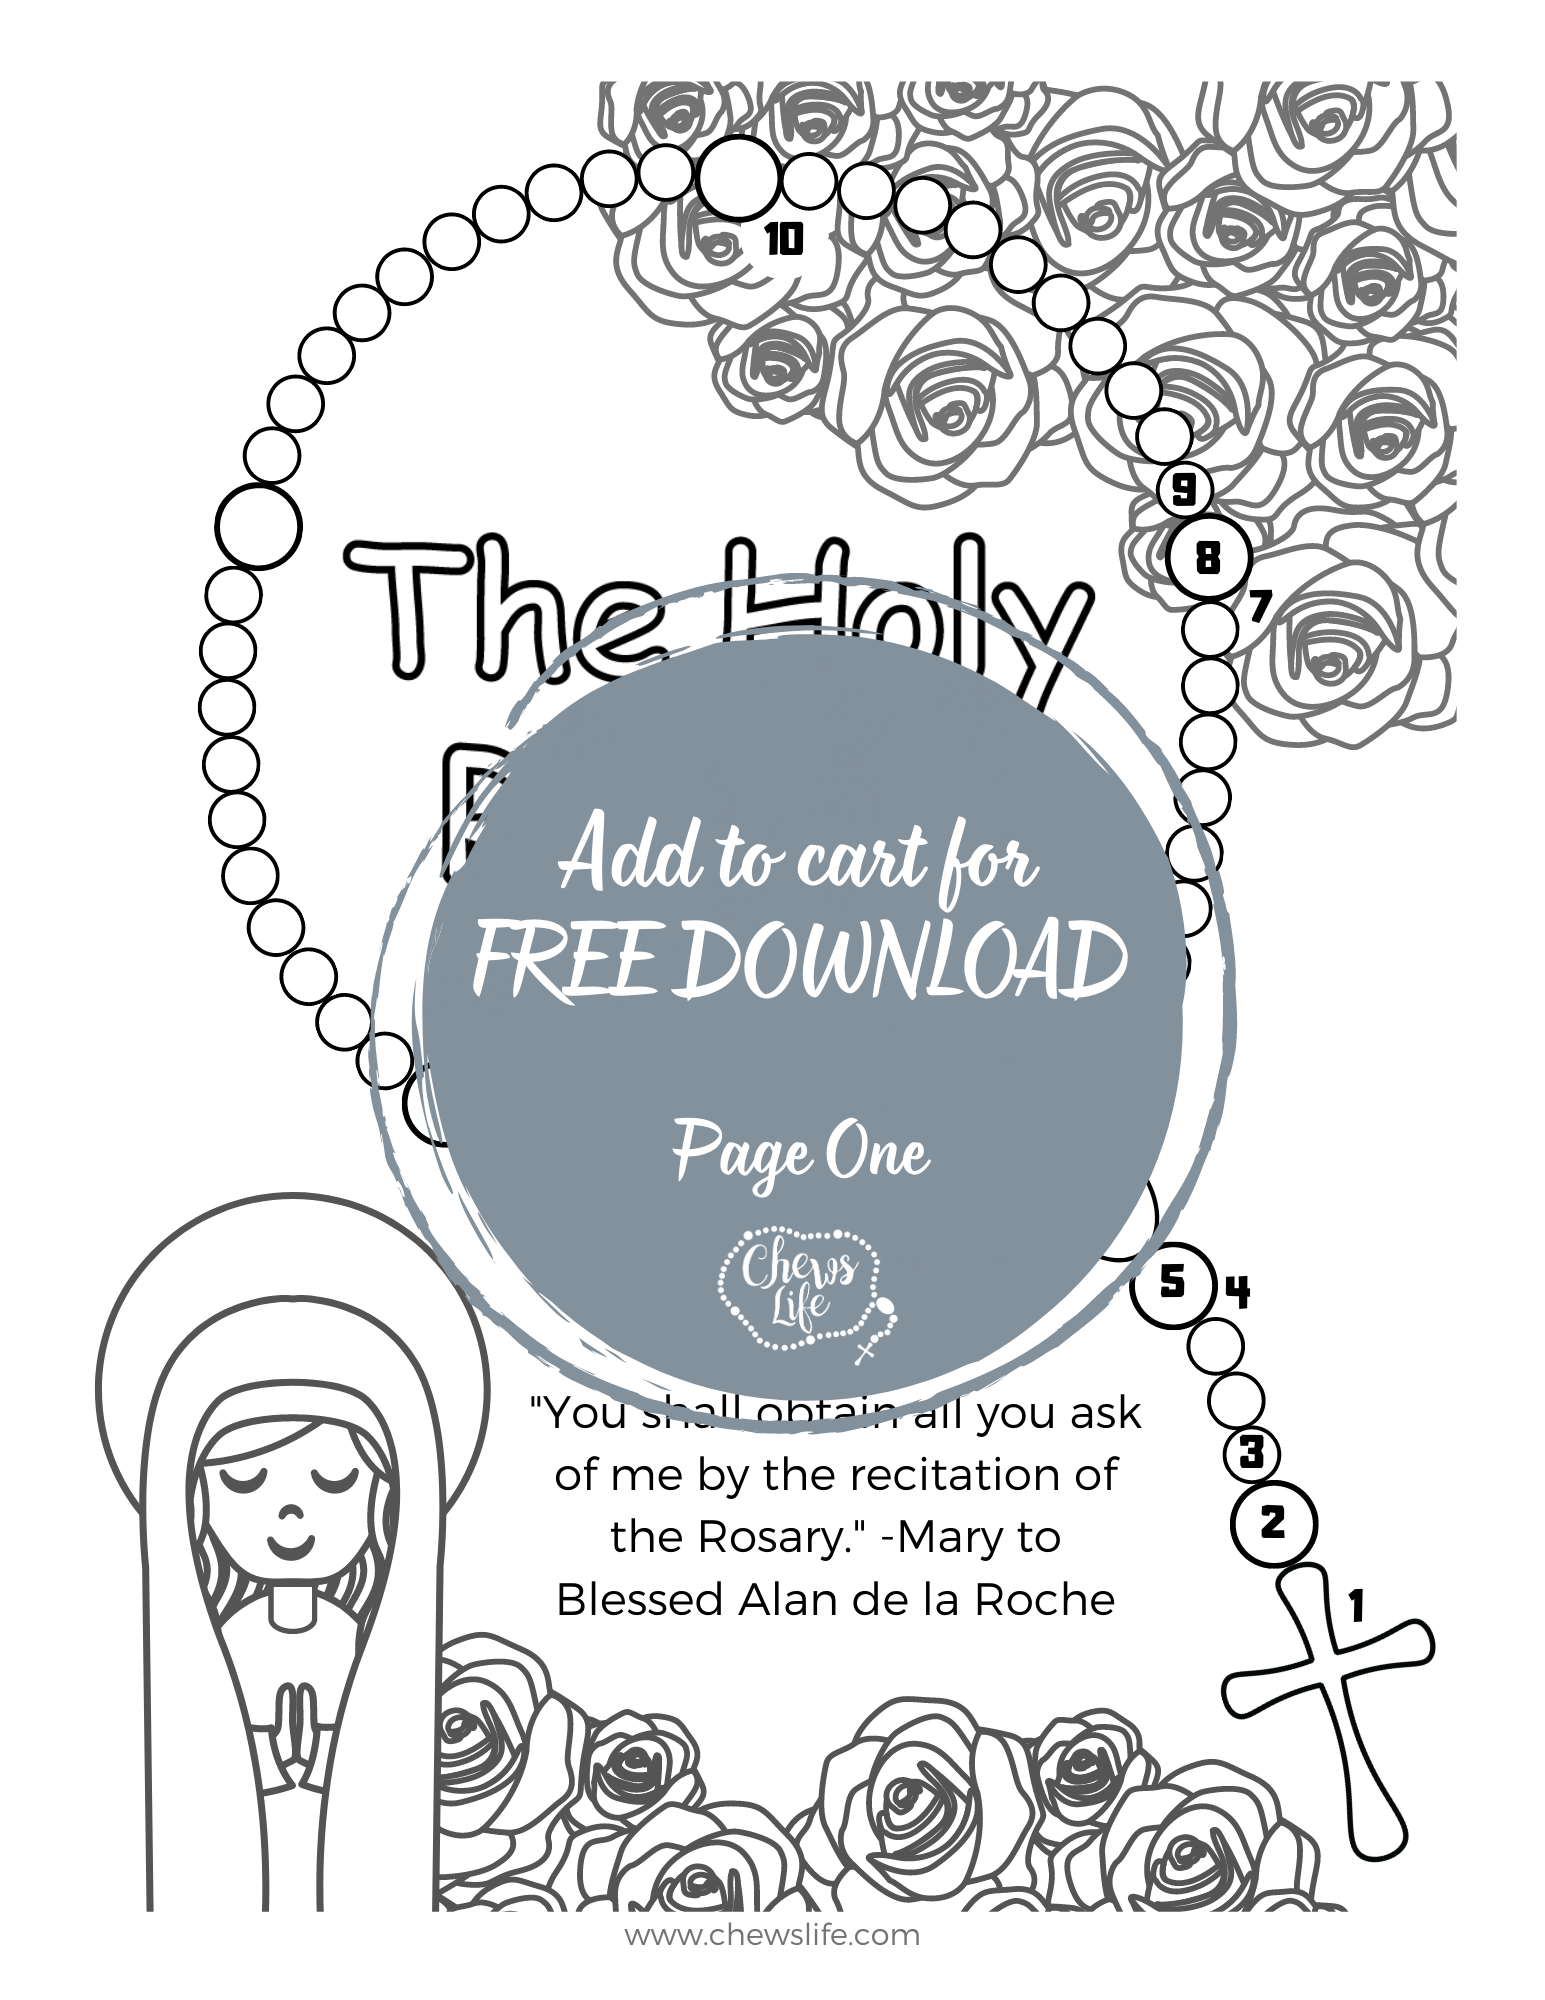 chews-life-coloring-pages-how-to-pray-the-rosary-31349552644272.png